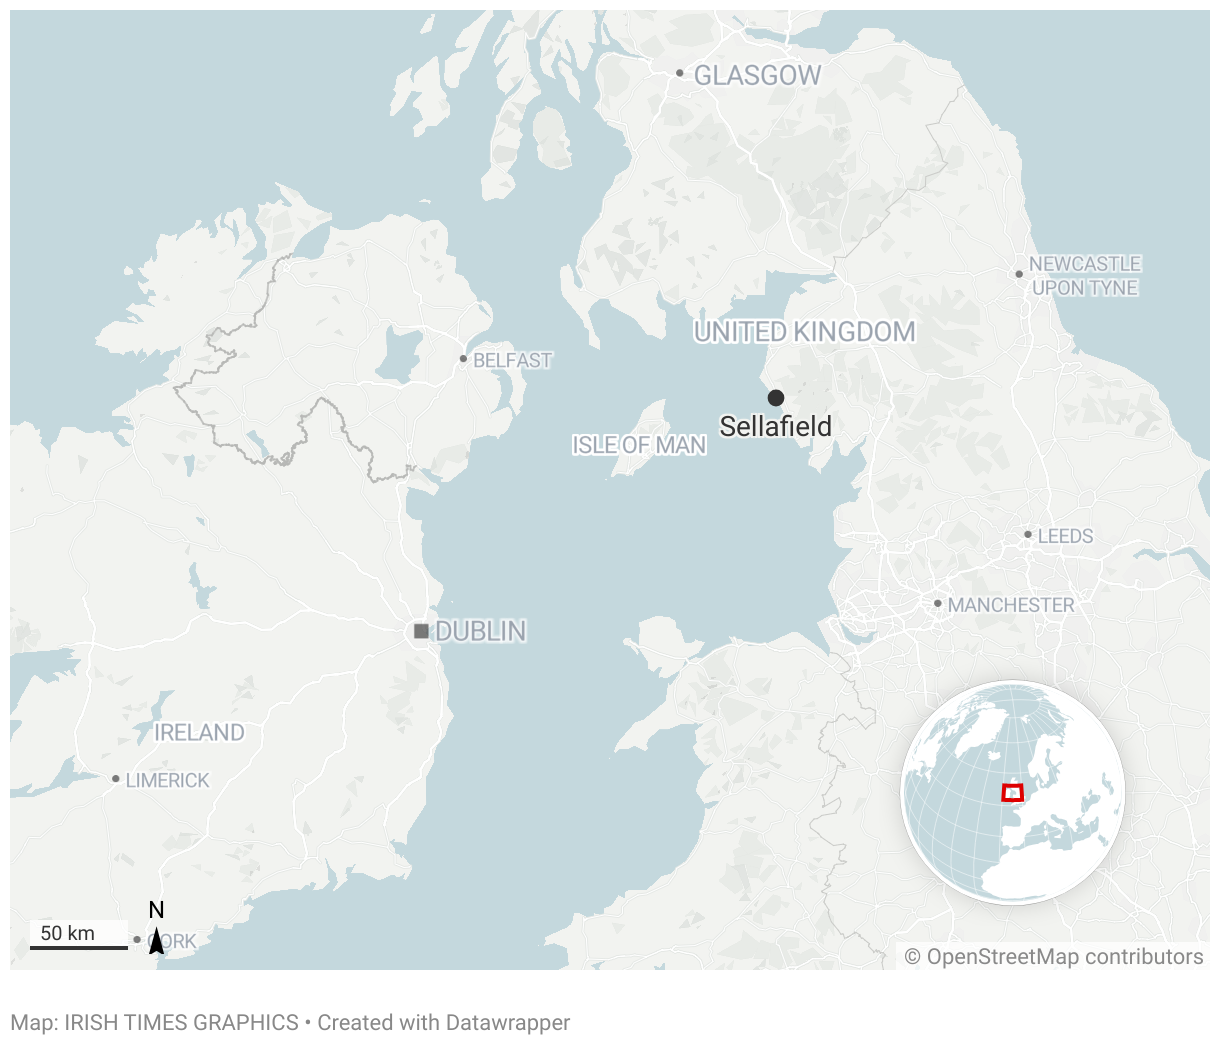 Map showing location of Sellafield nuclear plant, in Cumbria, England, in relation to Ireland